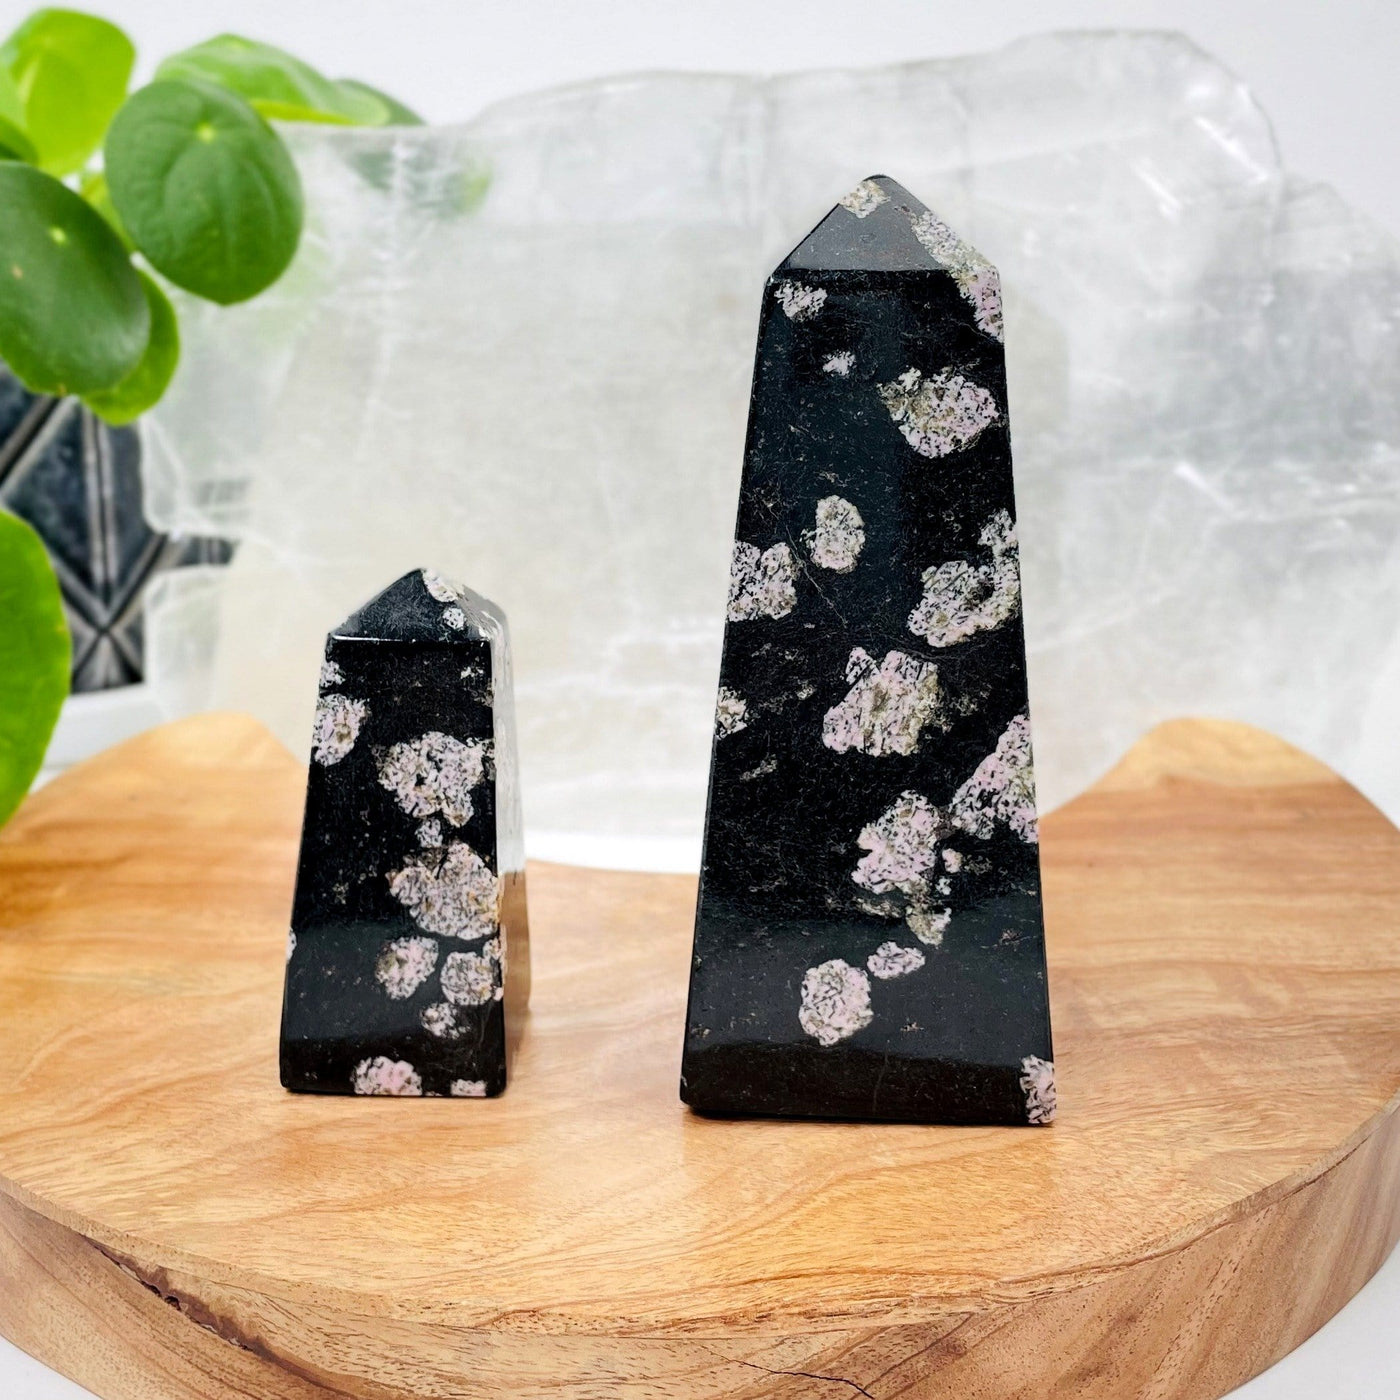 2 different sized black jade with pink thulite obelisks with decorations in the background